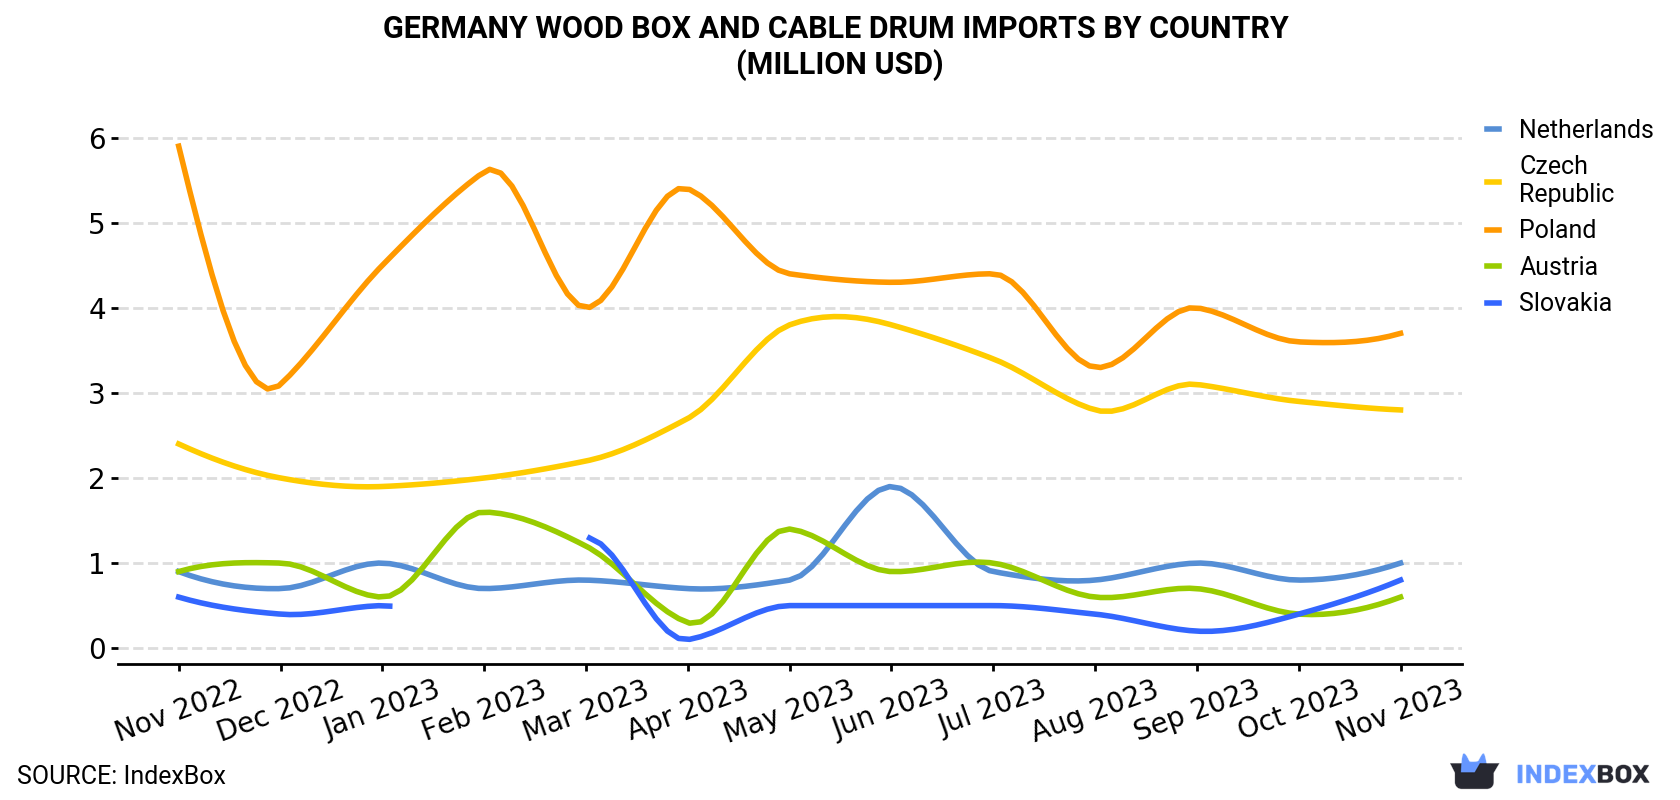 Germany Wood Box and Cable Drum Imports By Country (Million USD)